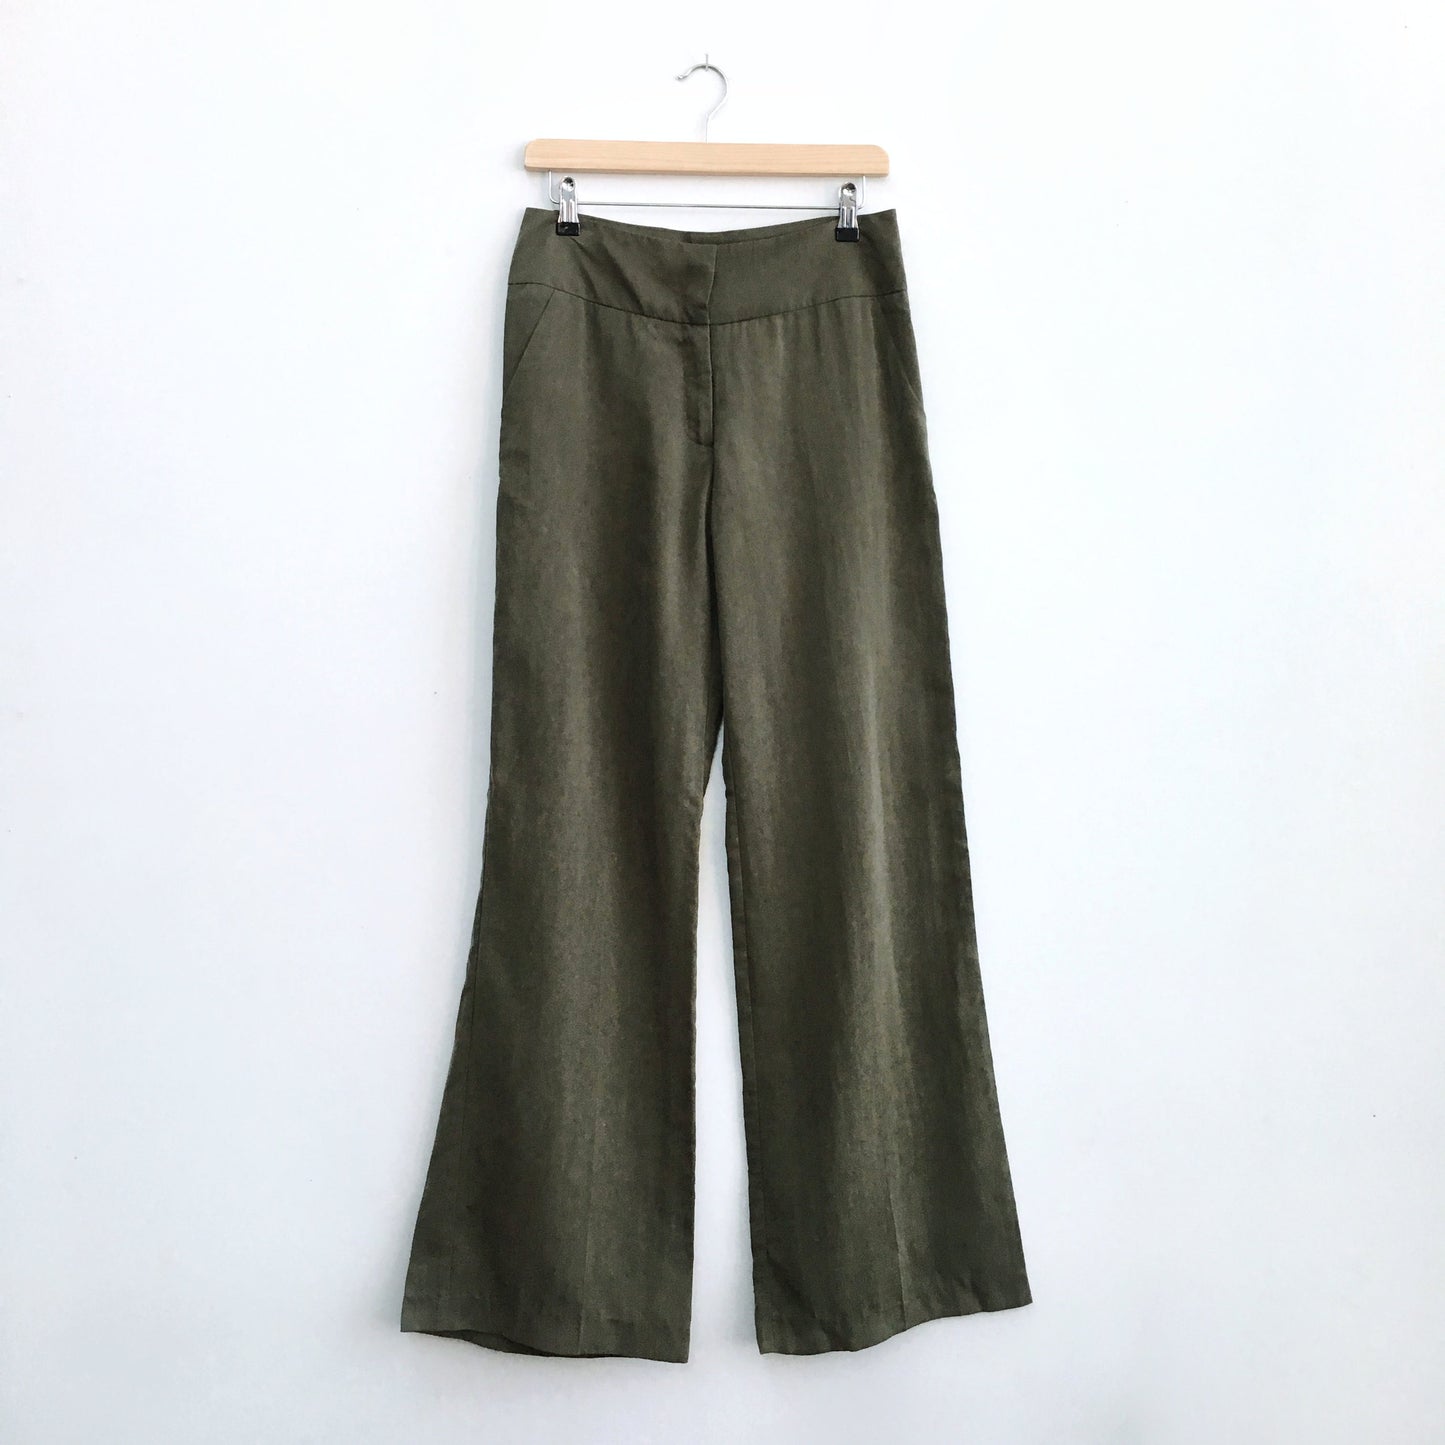 Anthropologie Wide Leg Trousers - size 6